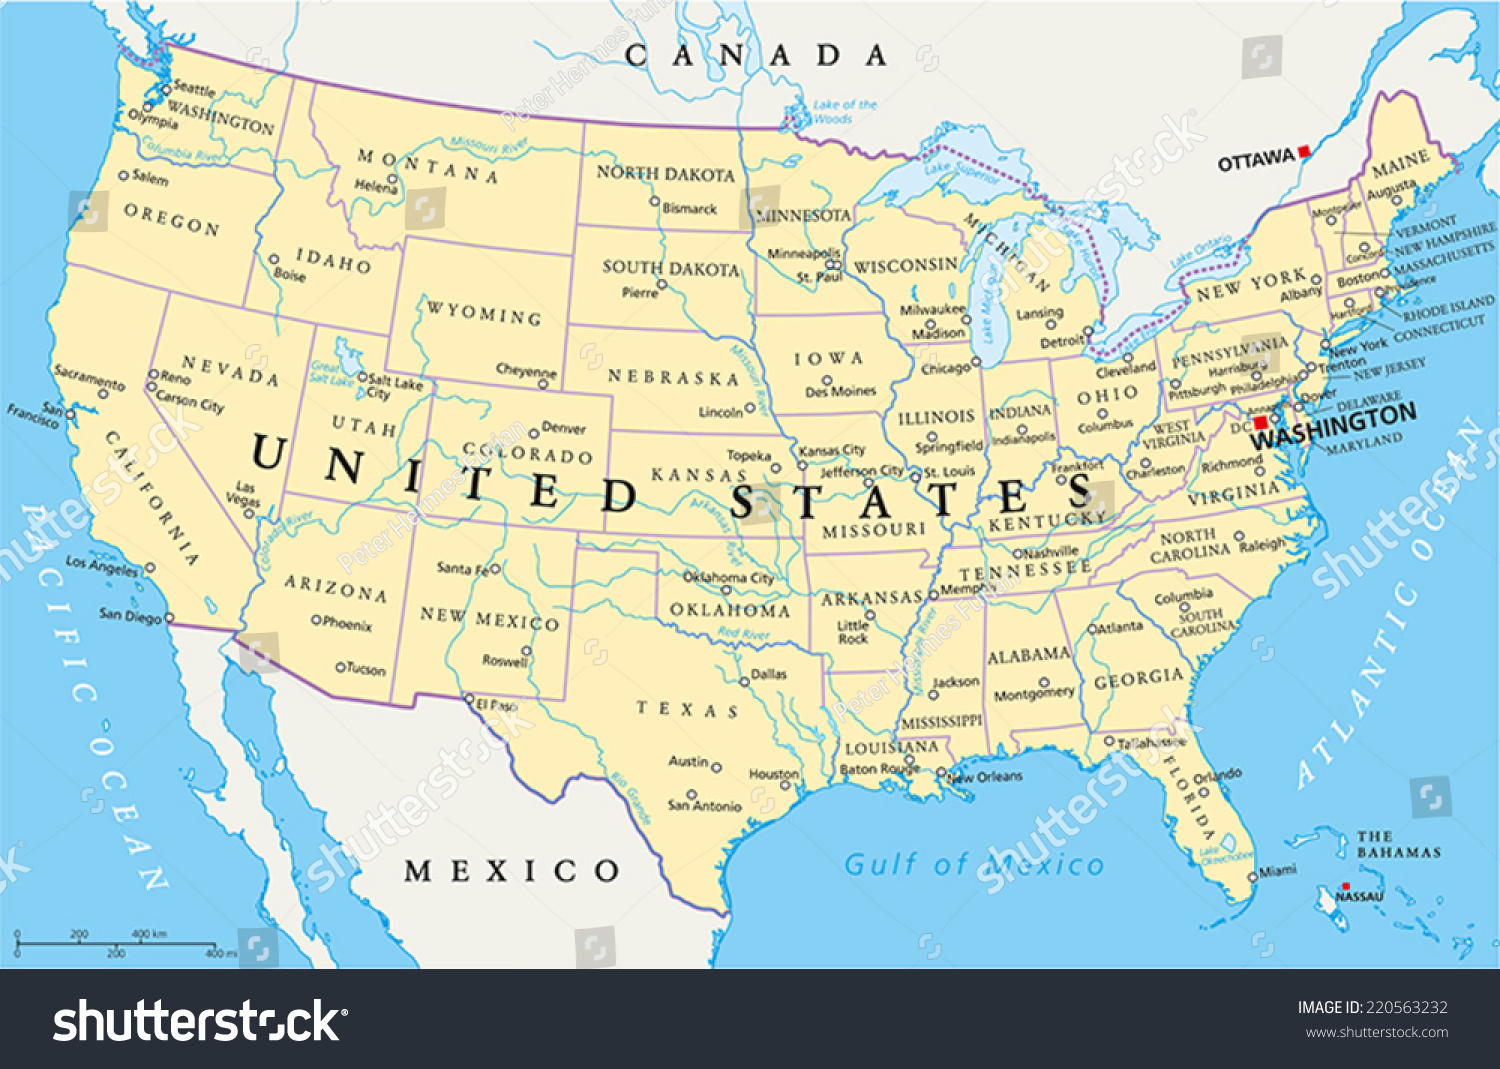 SVG of United States of America Political Map with capital Washington, national borders, most important cities, rivers and lakes. With single states, their borders and capitals, except Hawaii and Alaska. svg